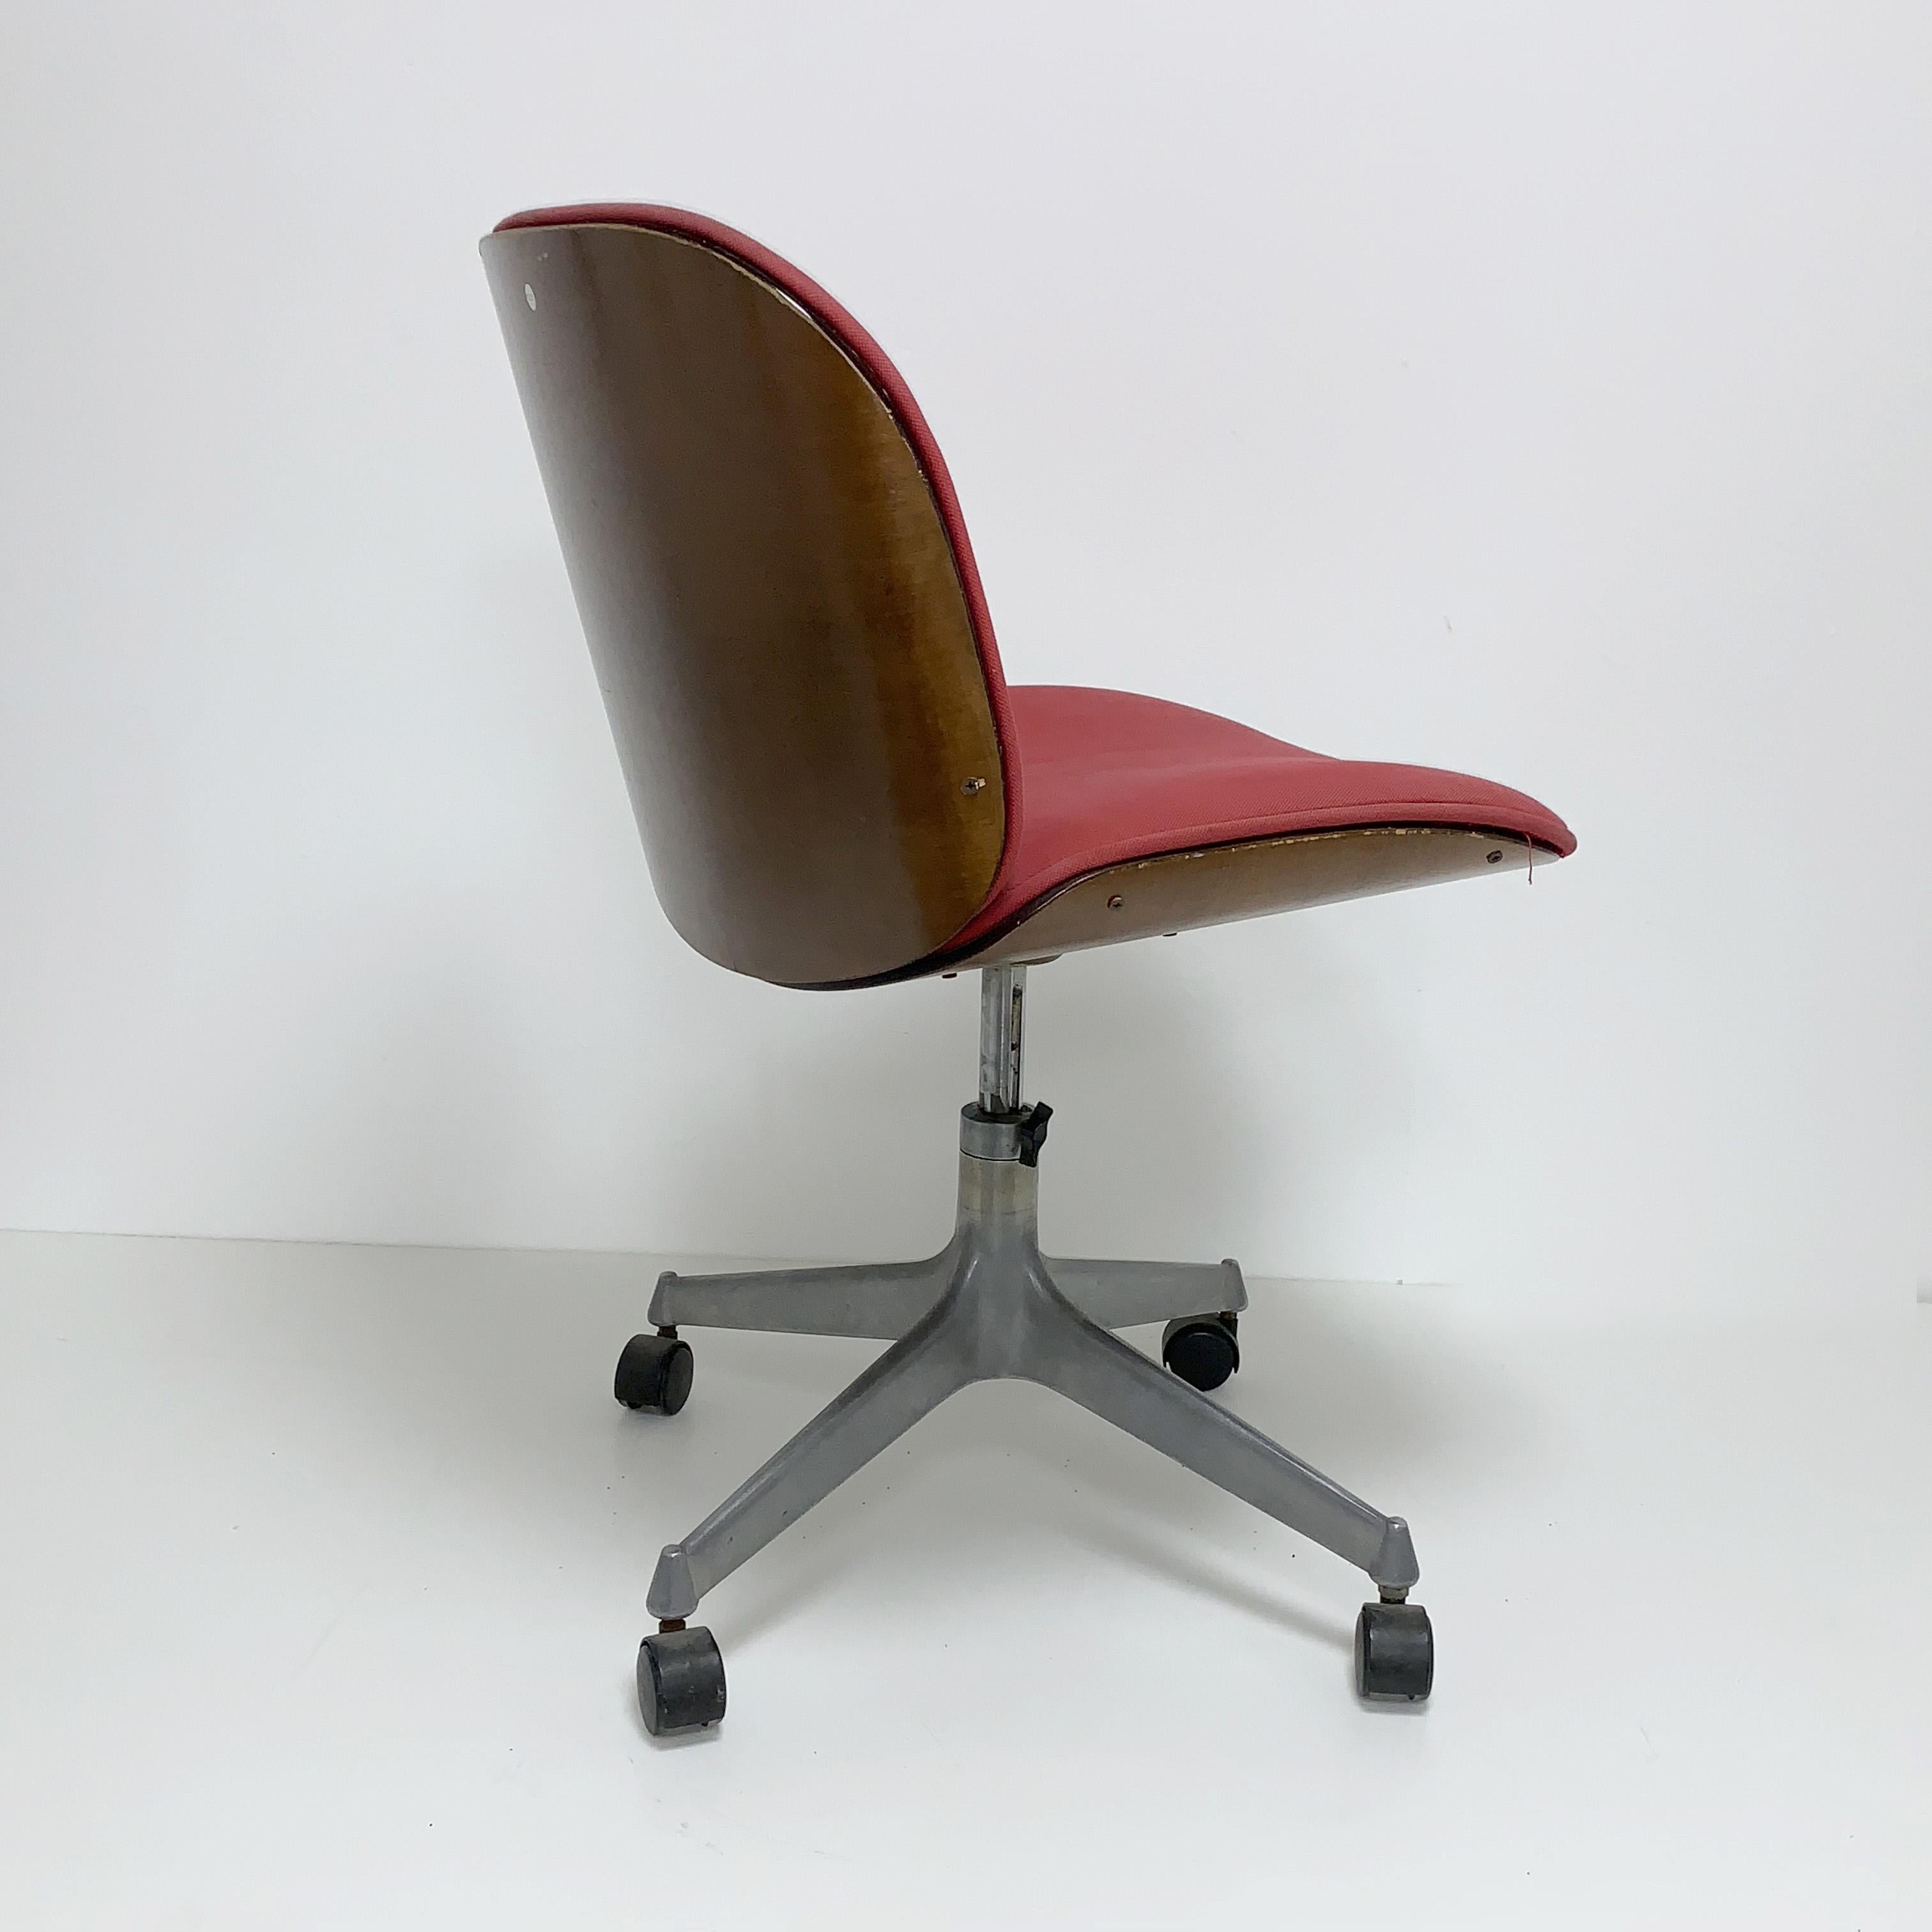 Ico & Luisa Parisi for MIM, Swivel Office Chair, M.I.M. Italy 1950s Swivel Chair 1